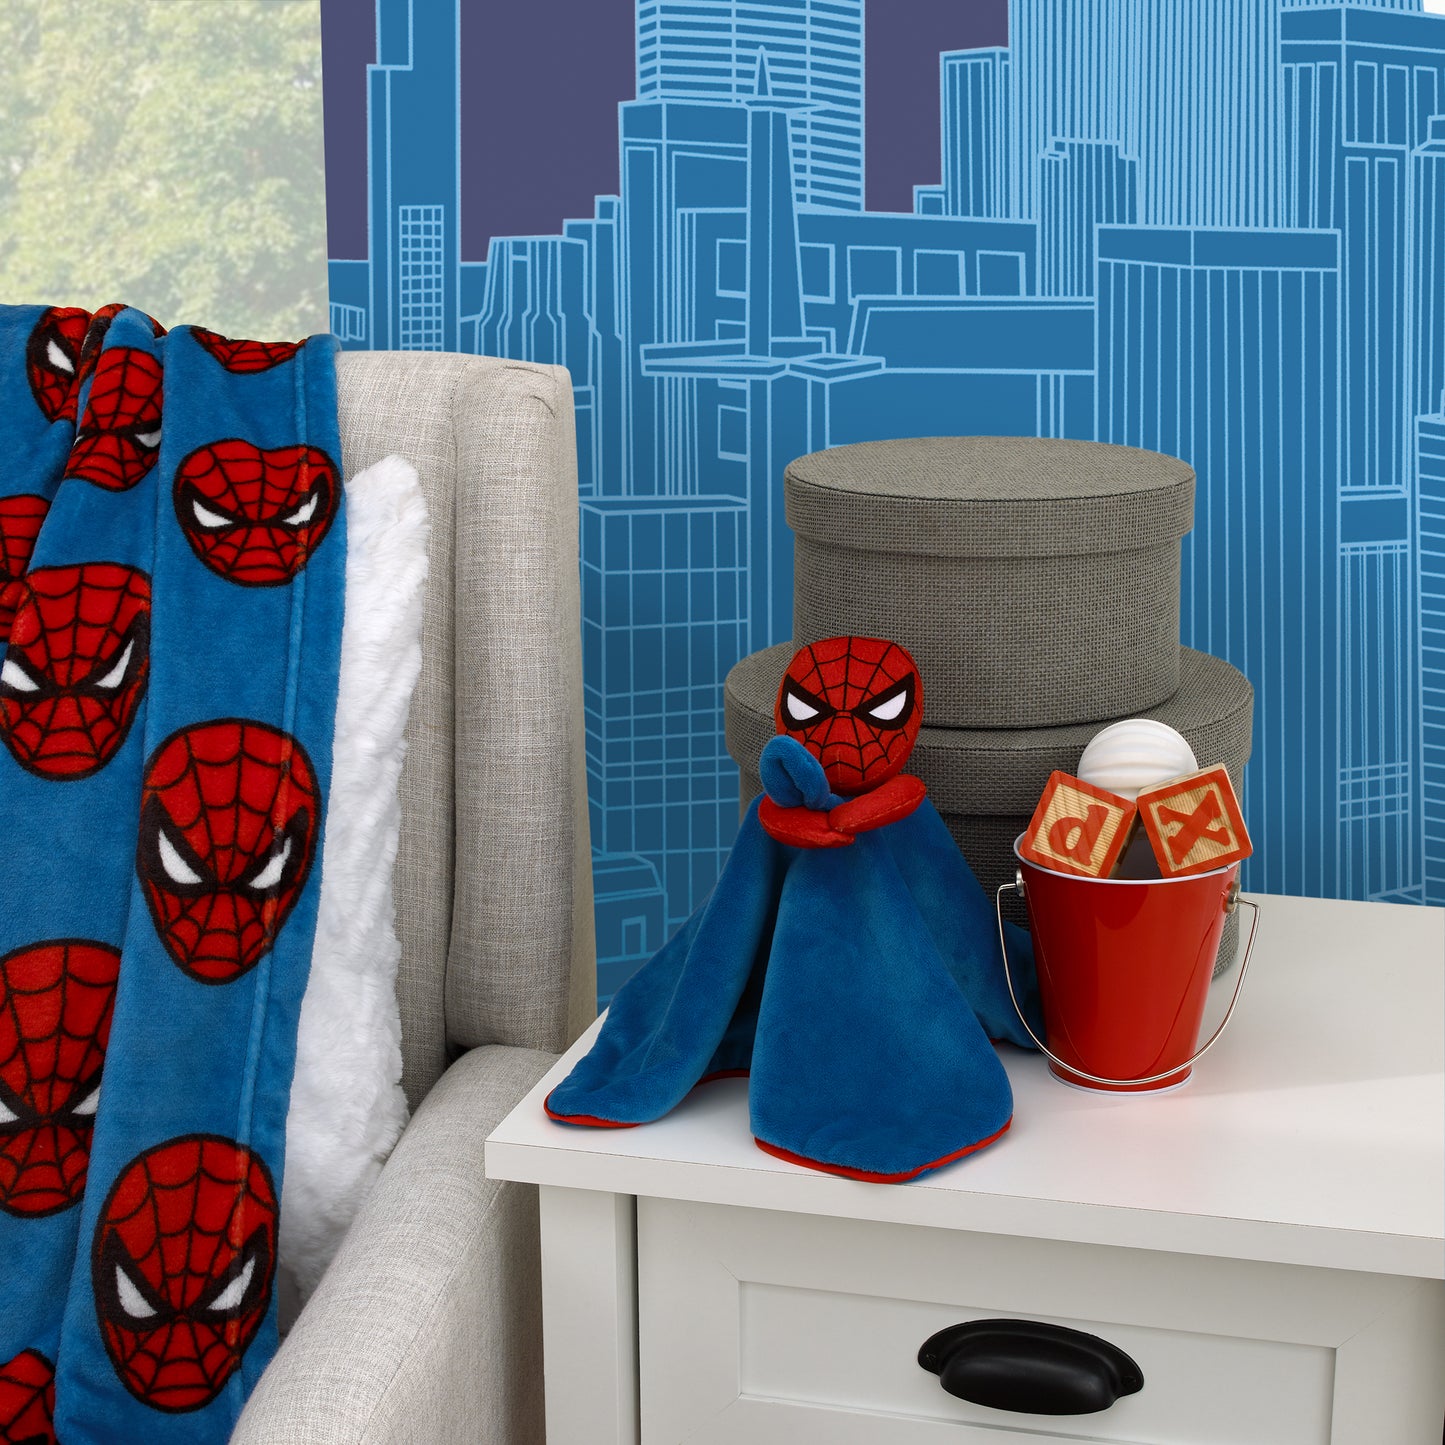 Marvel Spiderman Blue and Red Super Soft Security Baby Blanket